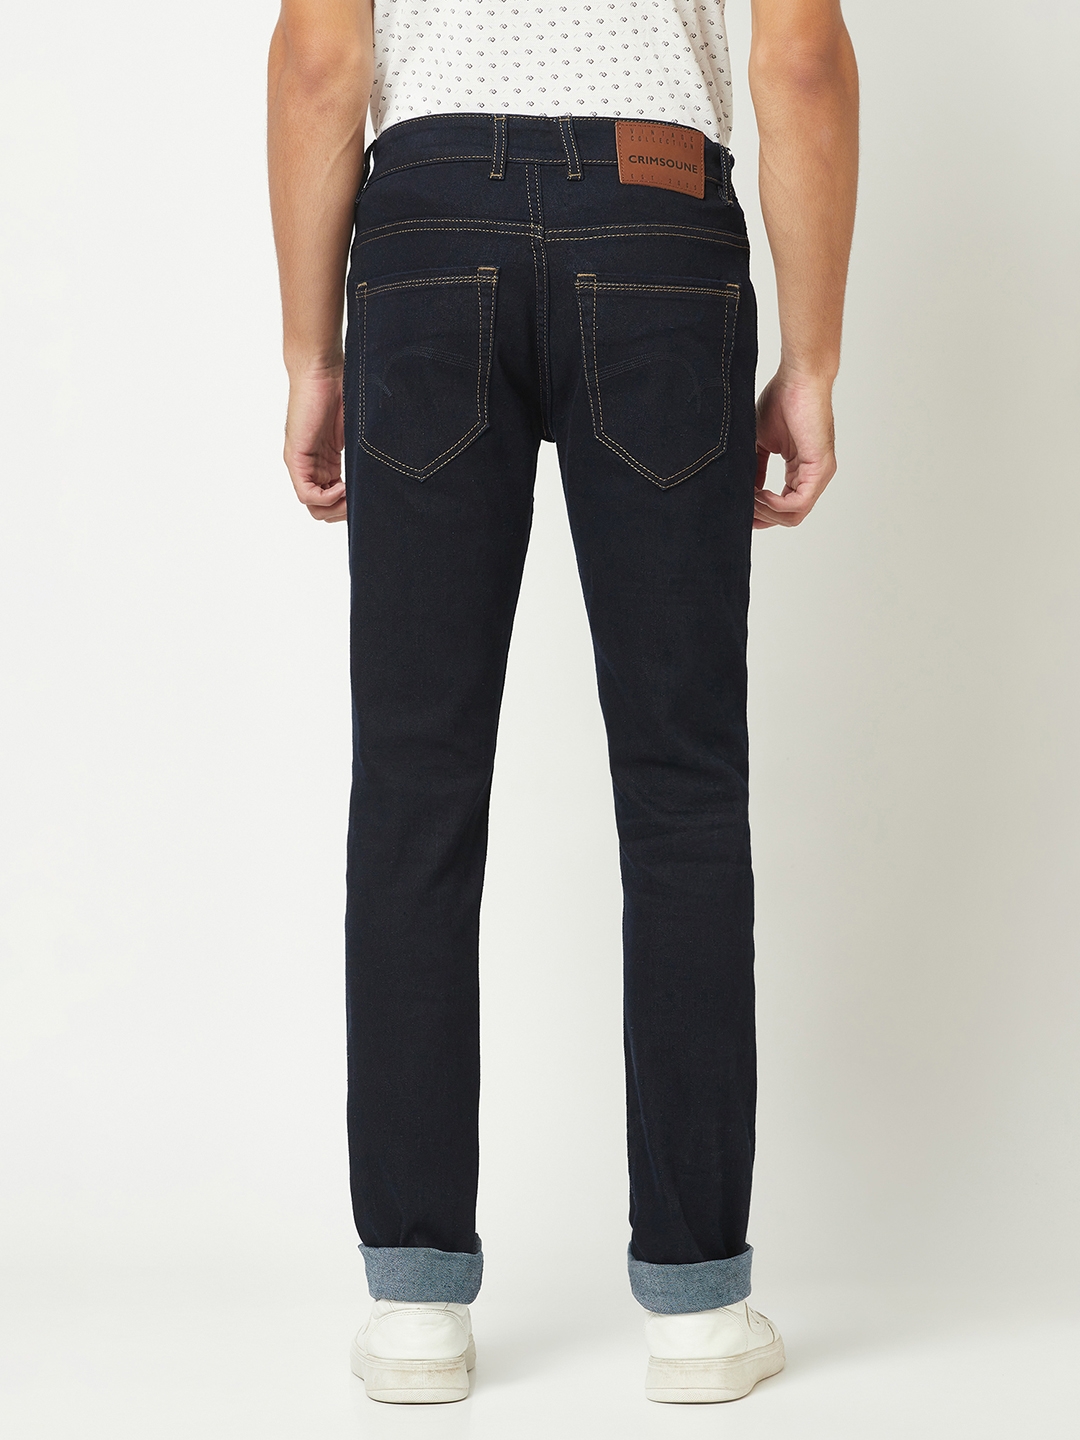 Jeans & Trousers | Price Drop!!!!!crimsoune Club Bootcut Jeans | Freeup